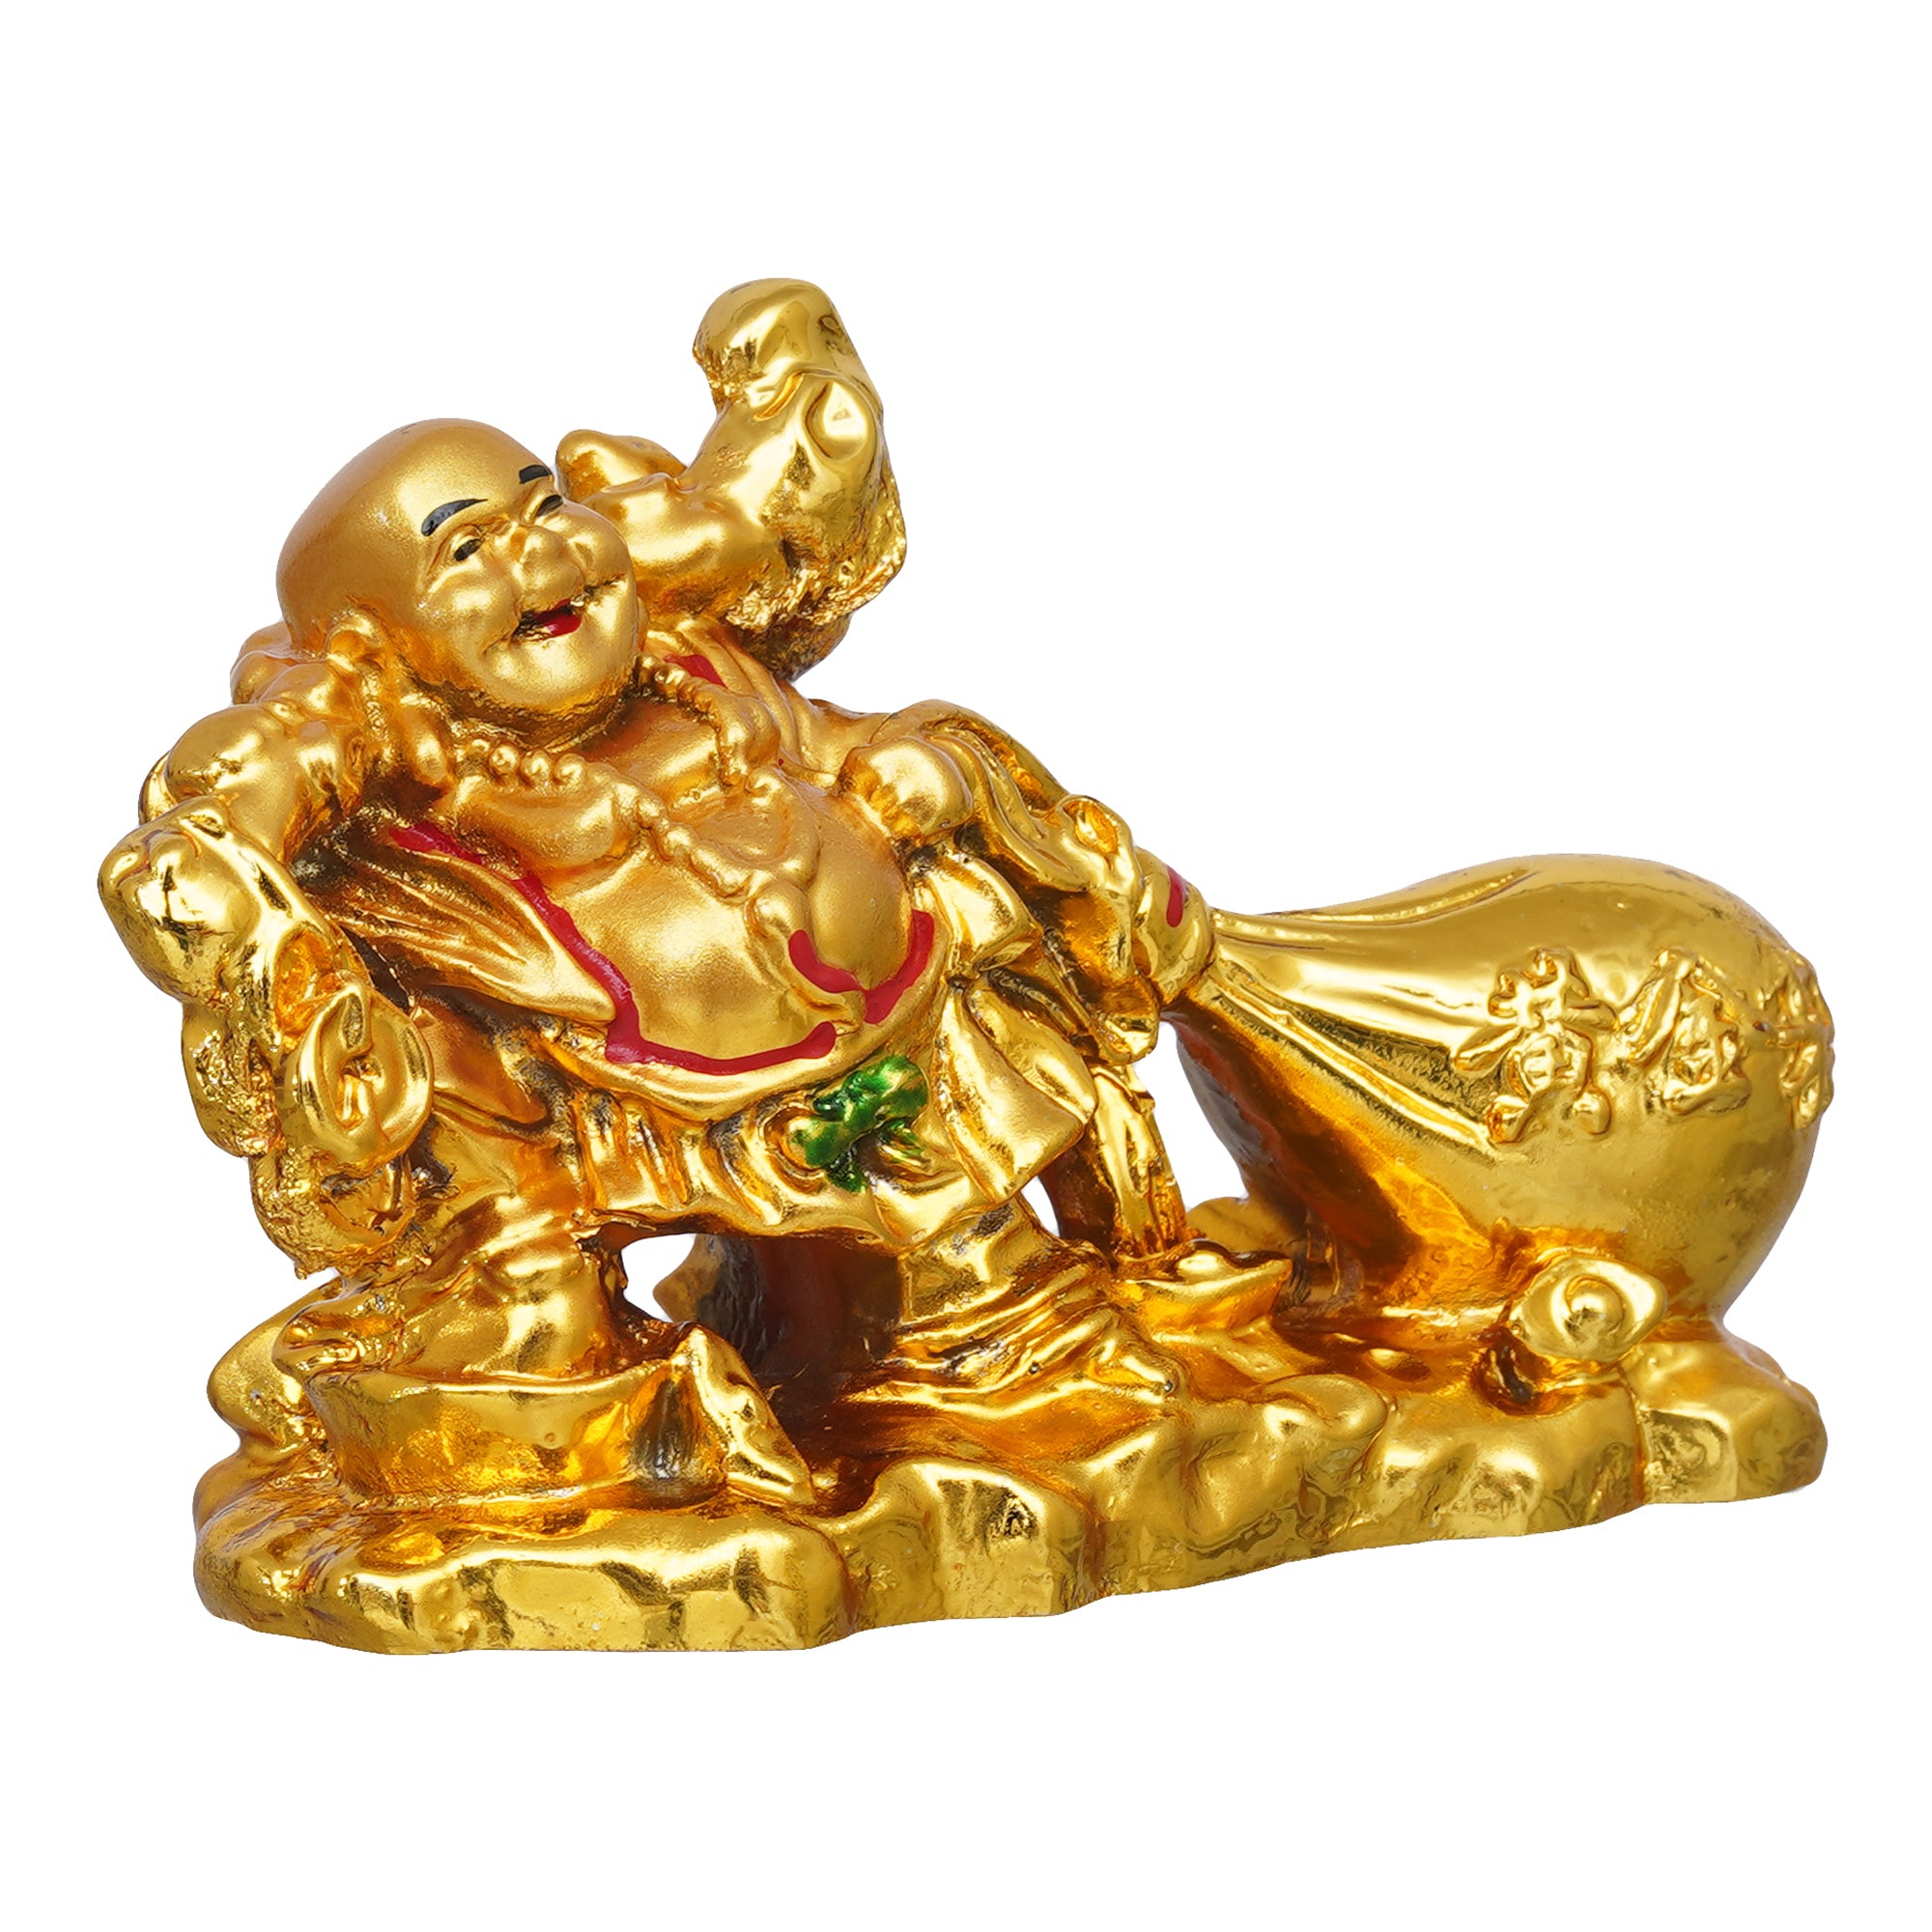 eCraftIndia Golden Polyresin Feng Shui Laughing Buddha Idol with Money Bag For Wealth And Good Luck 6